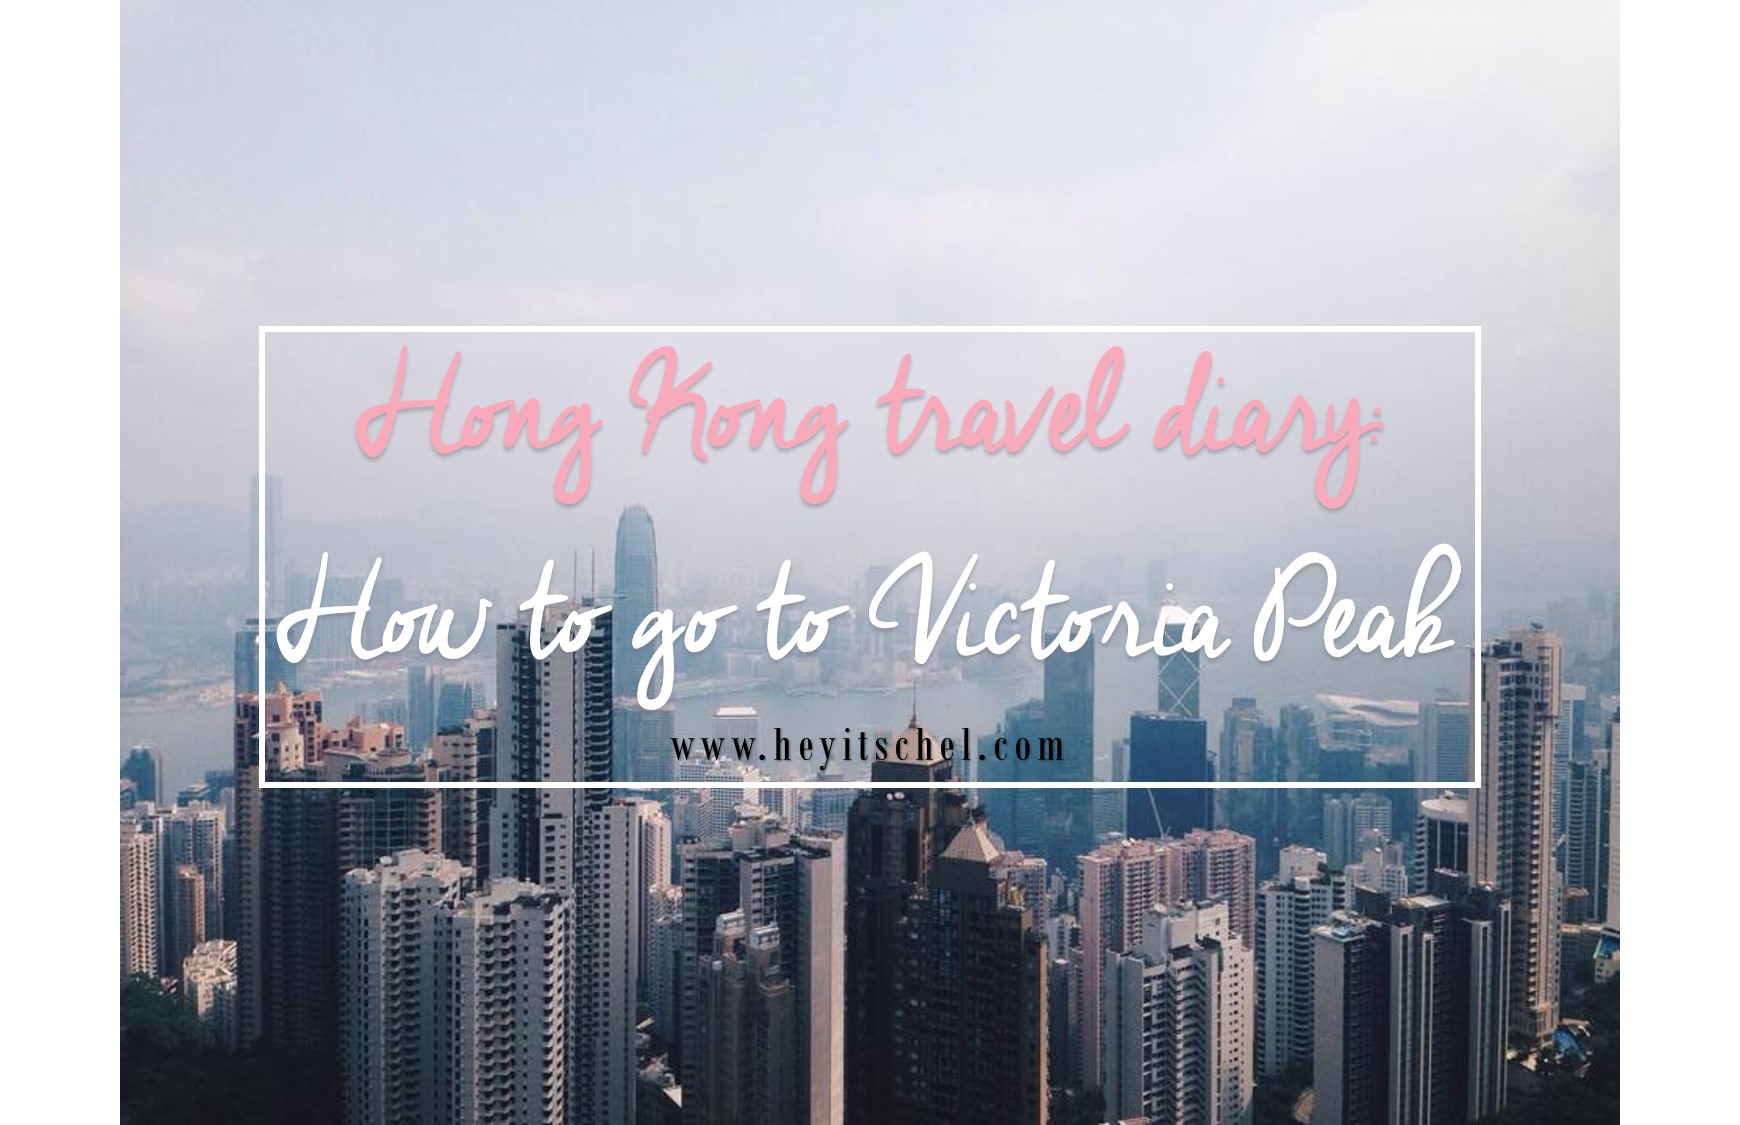 How to go to The Peak in Hong Kong